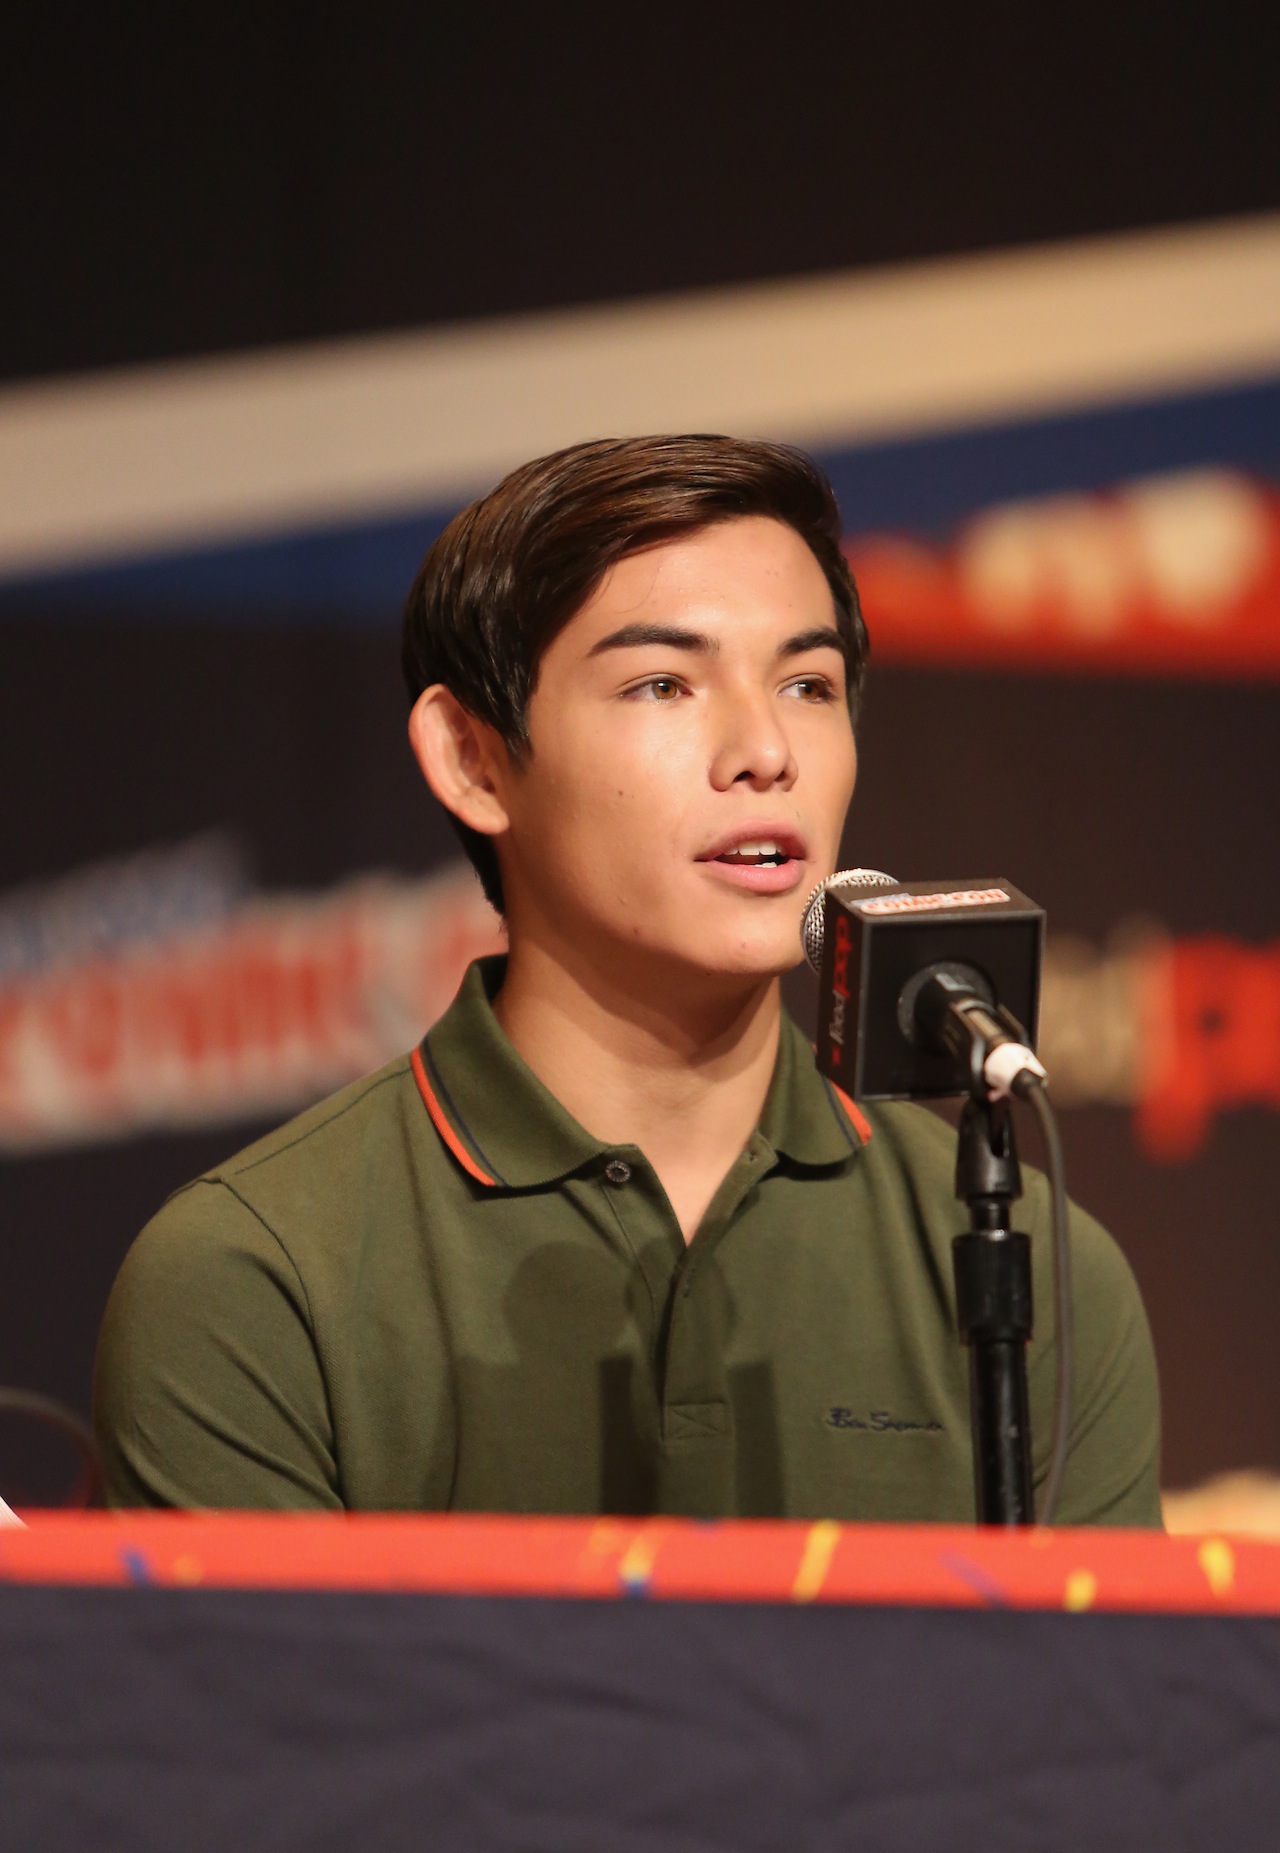 NEW YORK, NY - OCTOBER 09:  Actor Ryan Potter attends Walt Disney Studios' 2014 New York Comic Con presentation of "Big Hero 6" at the Javits Convention Center on Thursday October 9, 2014 in New York City.  (Photo by Jason Carter Rinaldi/Getty Images for Disney) *** Local Caption *** Ryan Potter